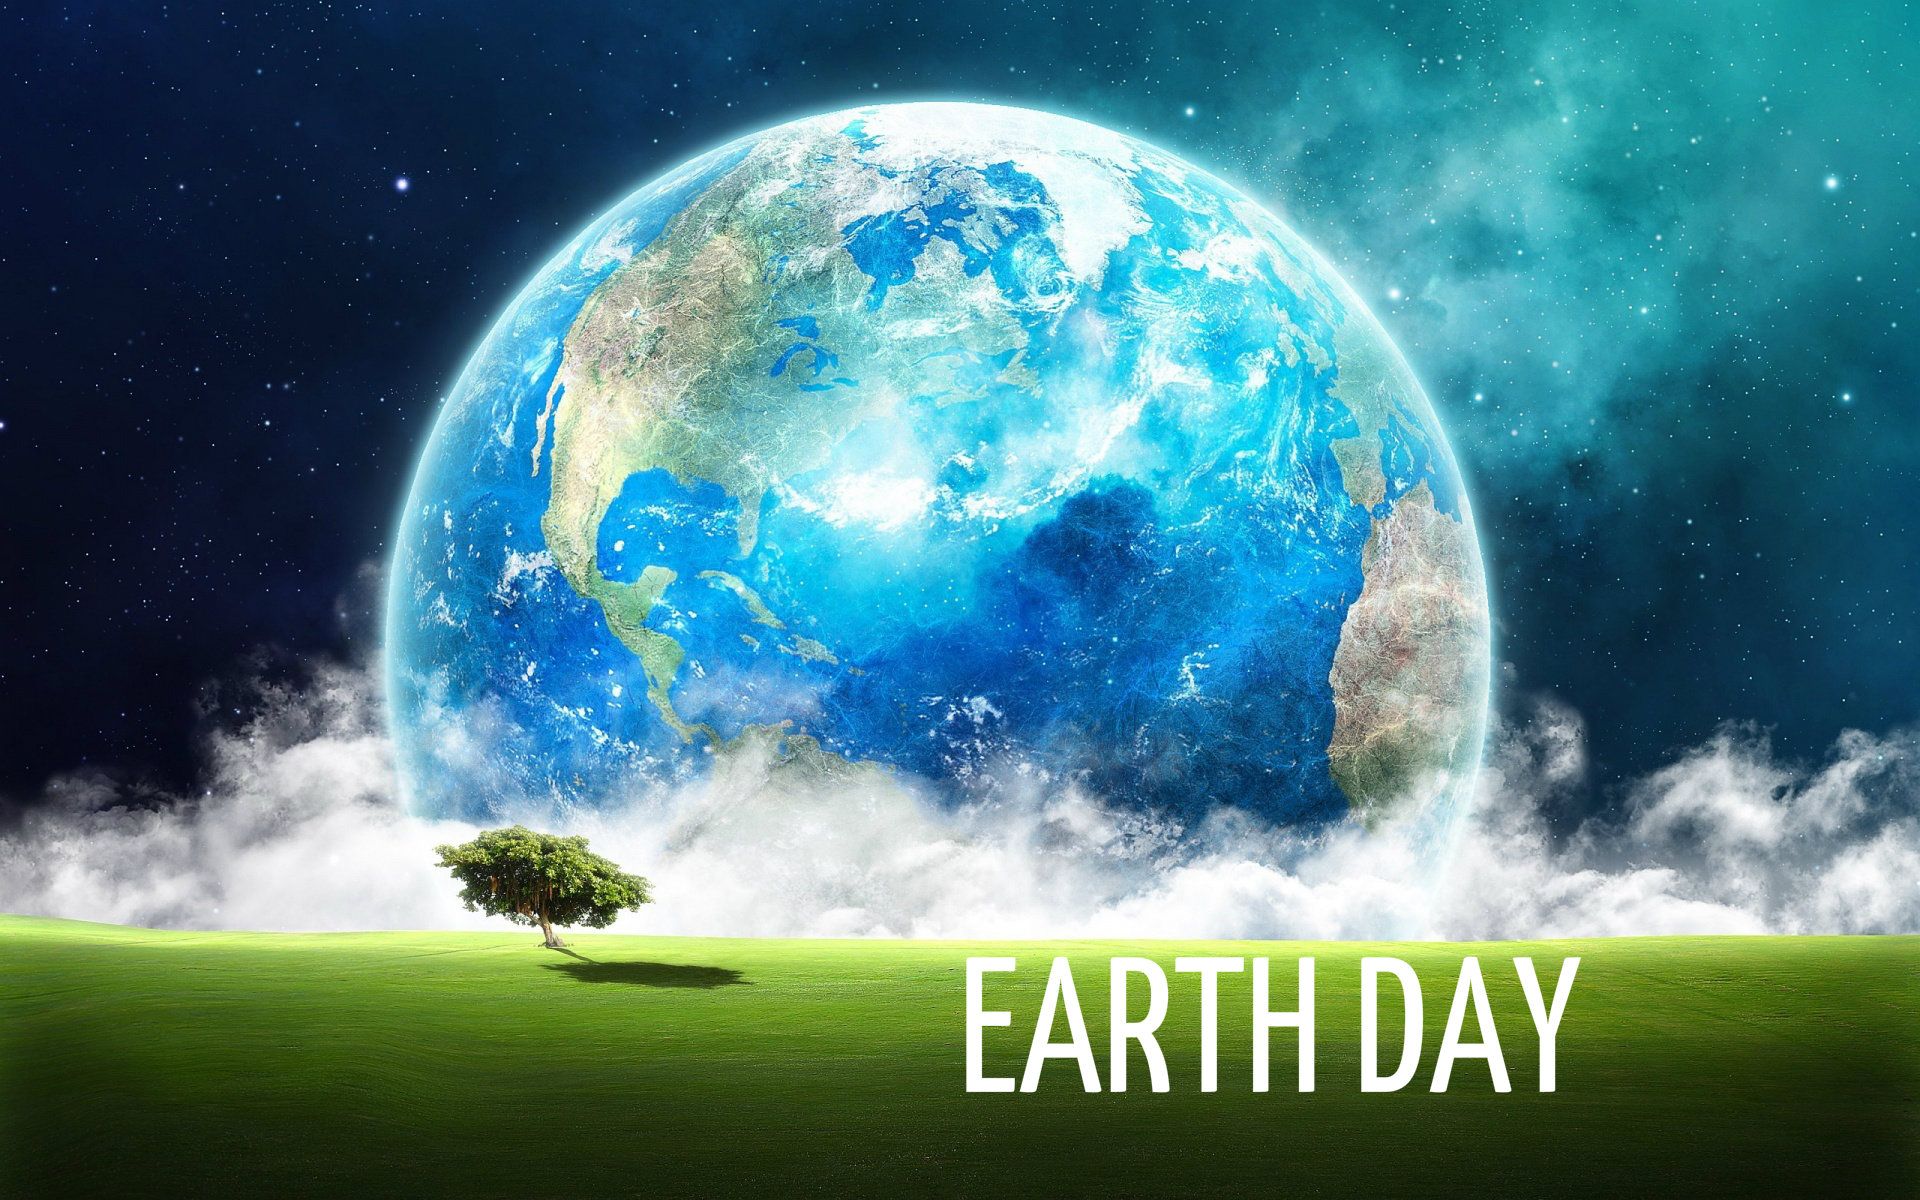 Earth Day 2019 Images  HD Wallpapers for Free Download Online Wish Happy Earth  Day With GIF Greetings  WhatsApp Stickers   LatestLY